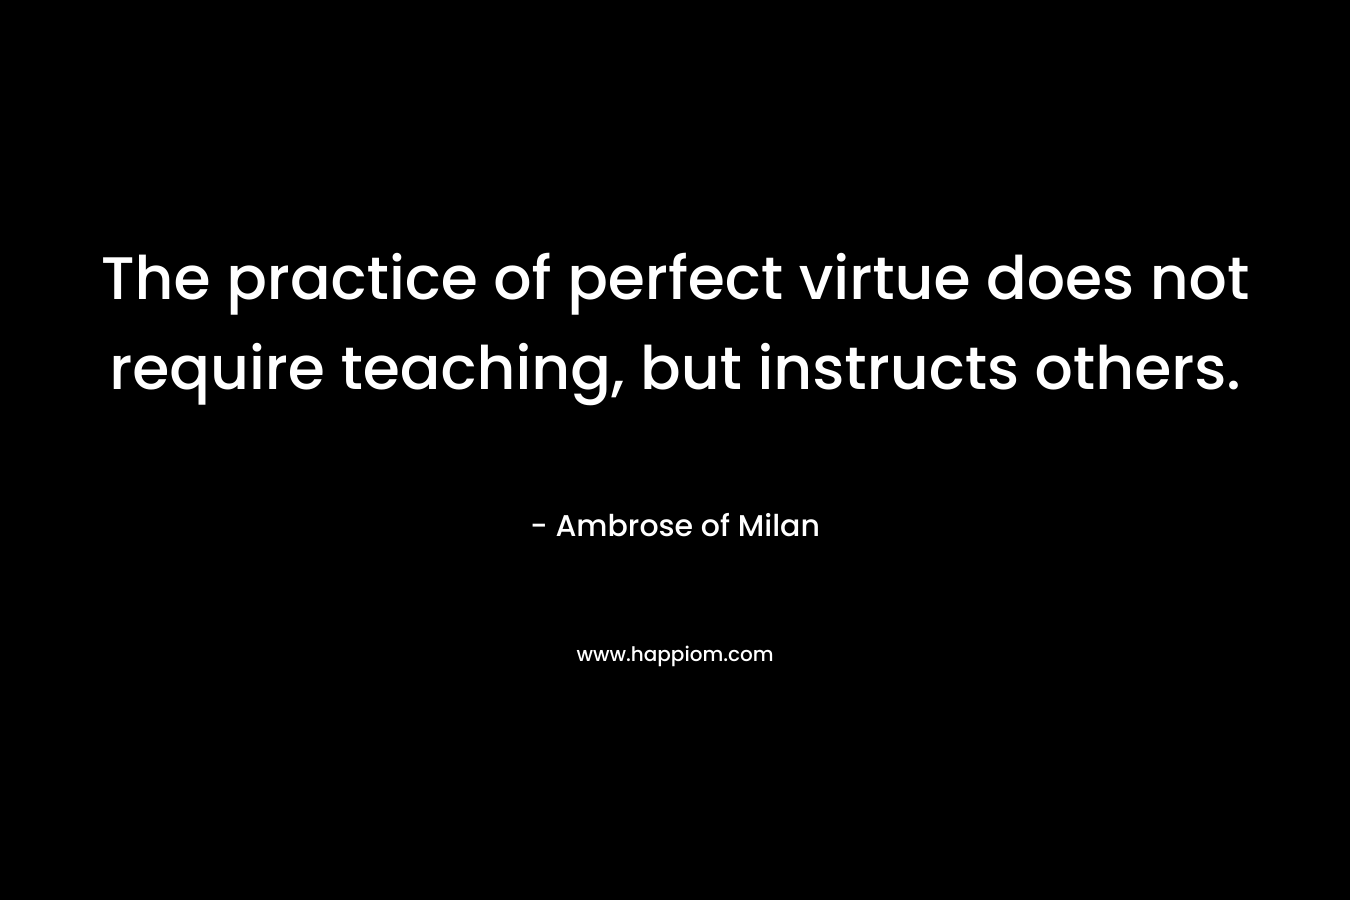 The practice of perfect virtue does not require teaching, but instructs others.